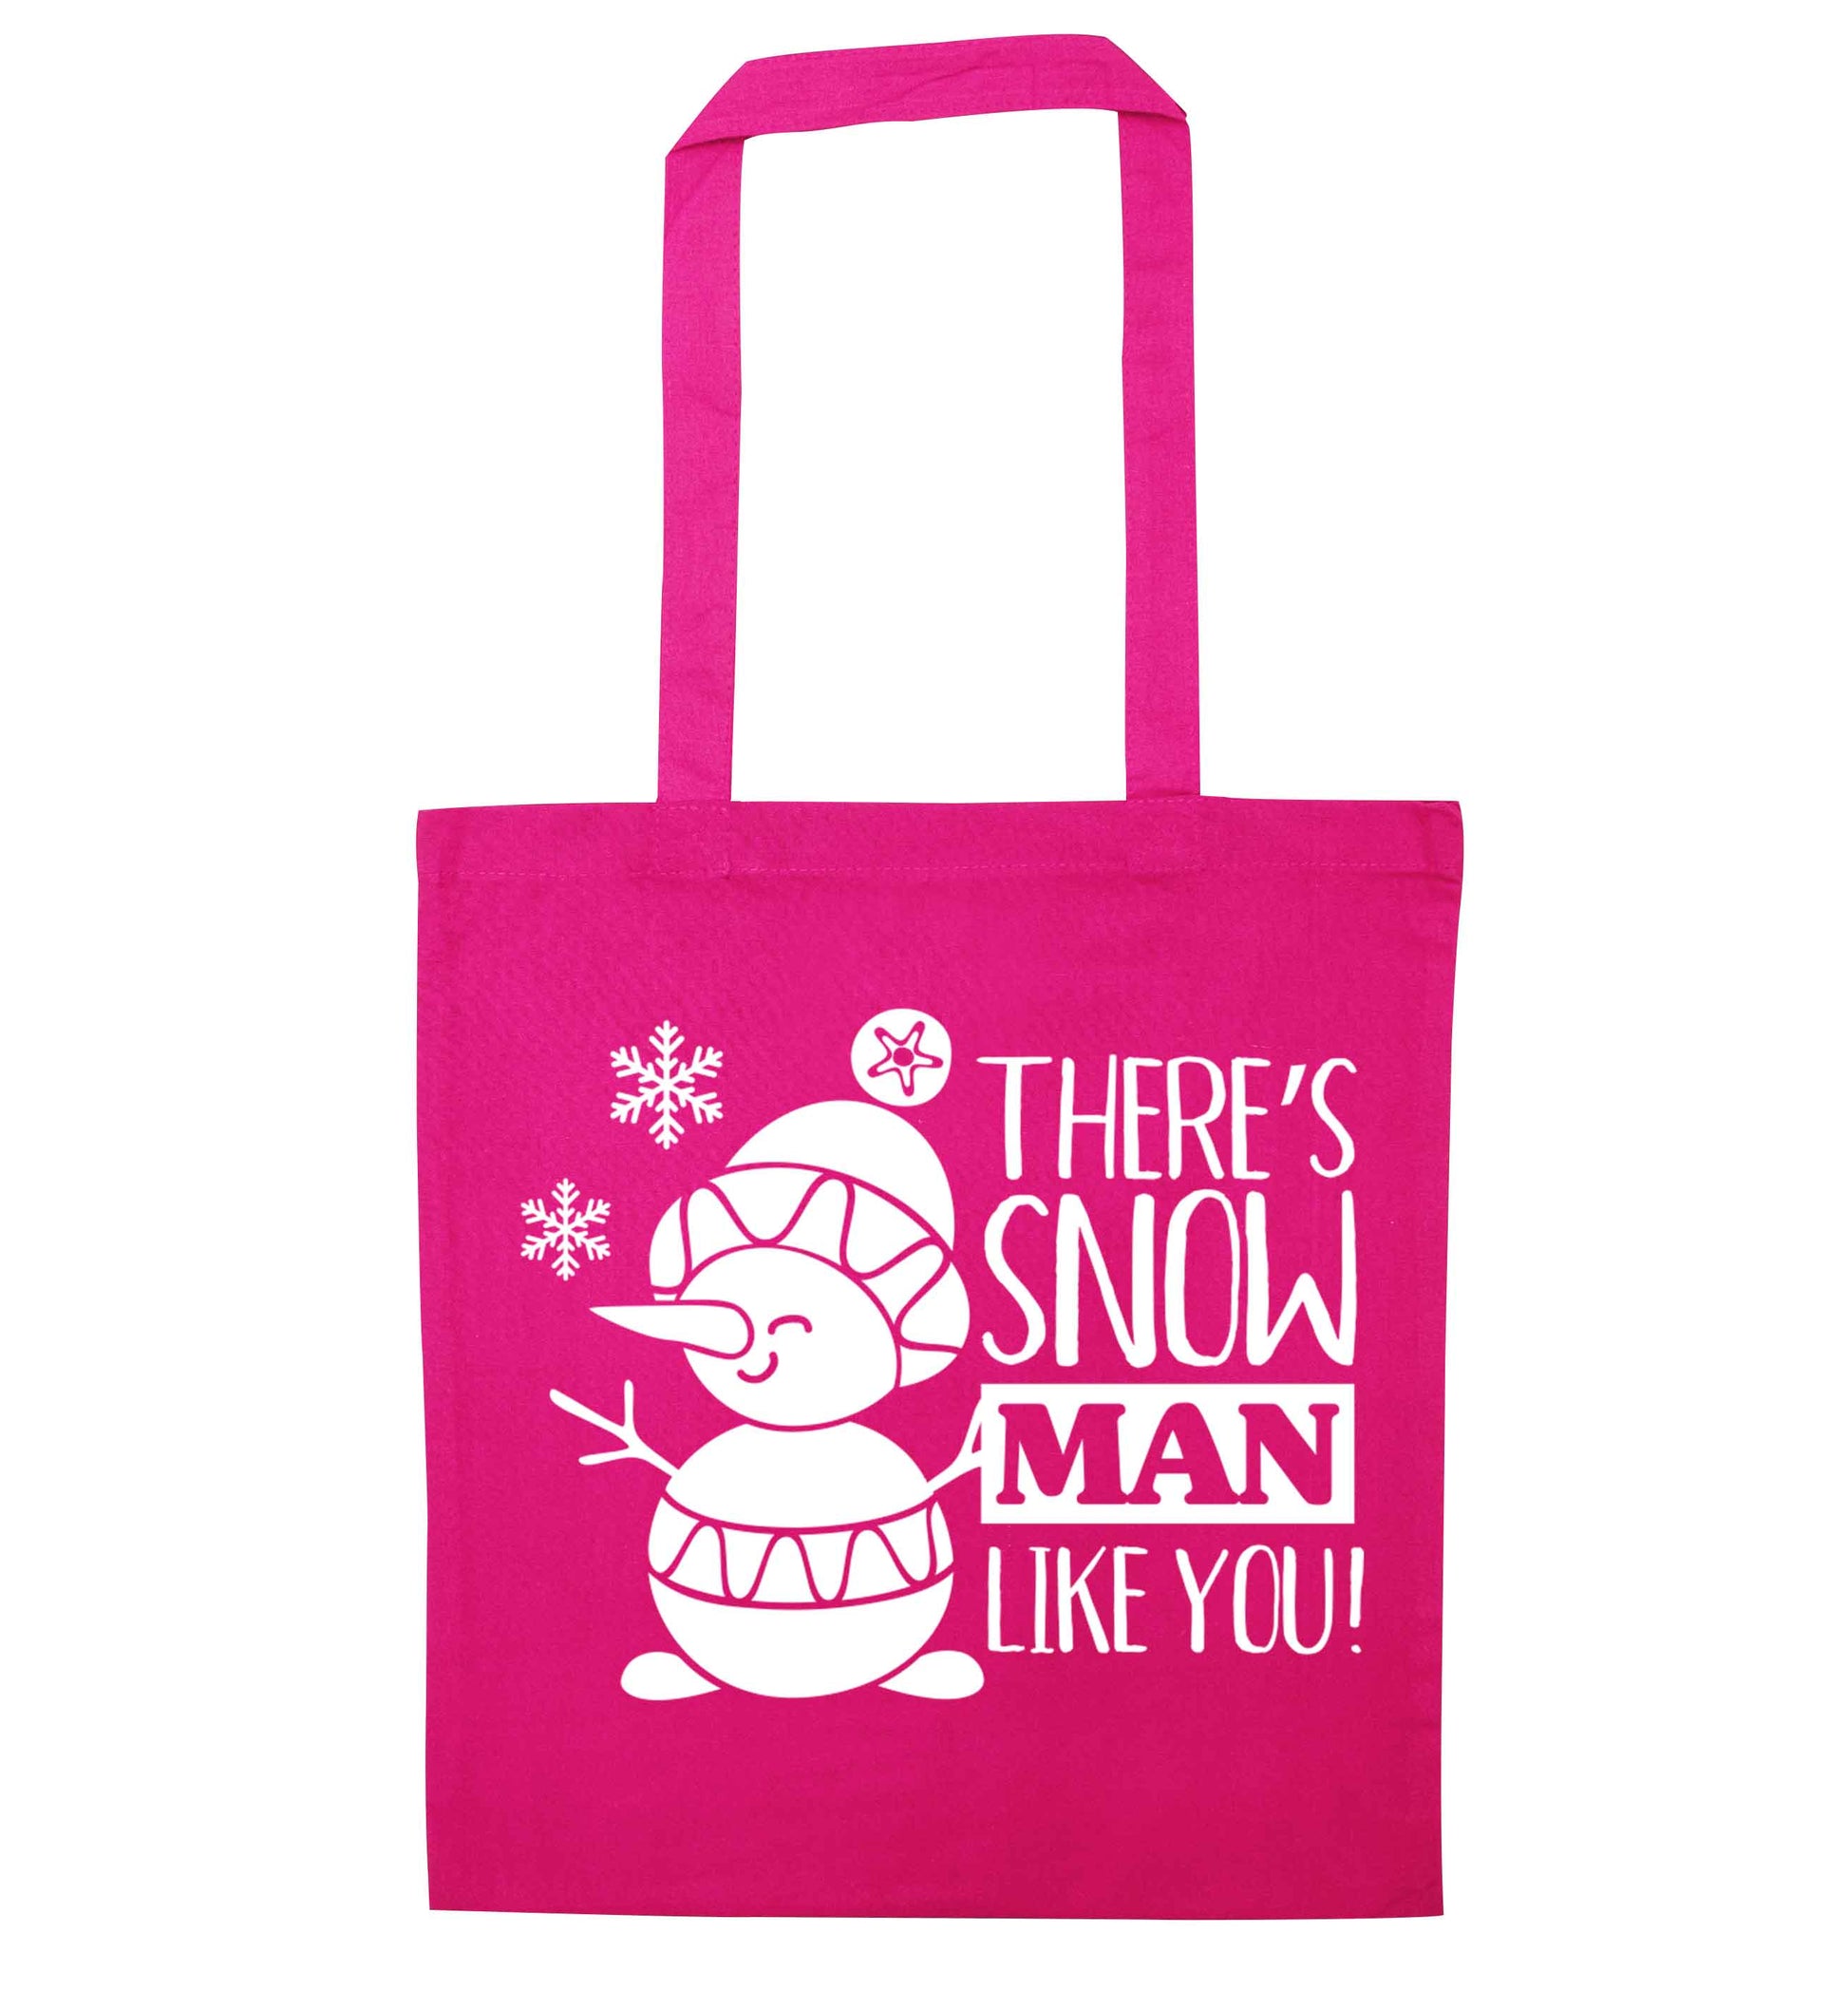 There's snow man like you pink tote bag